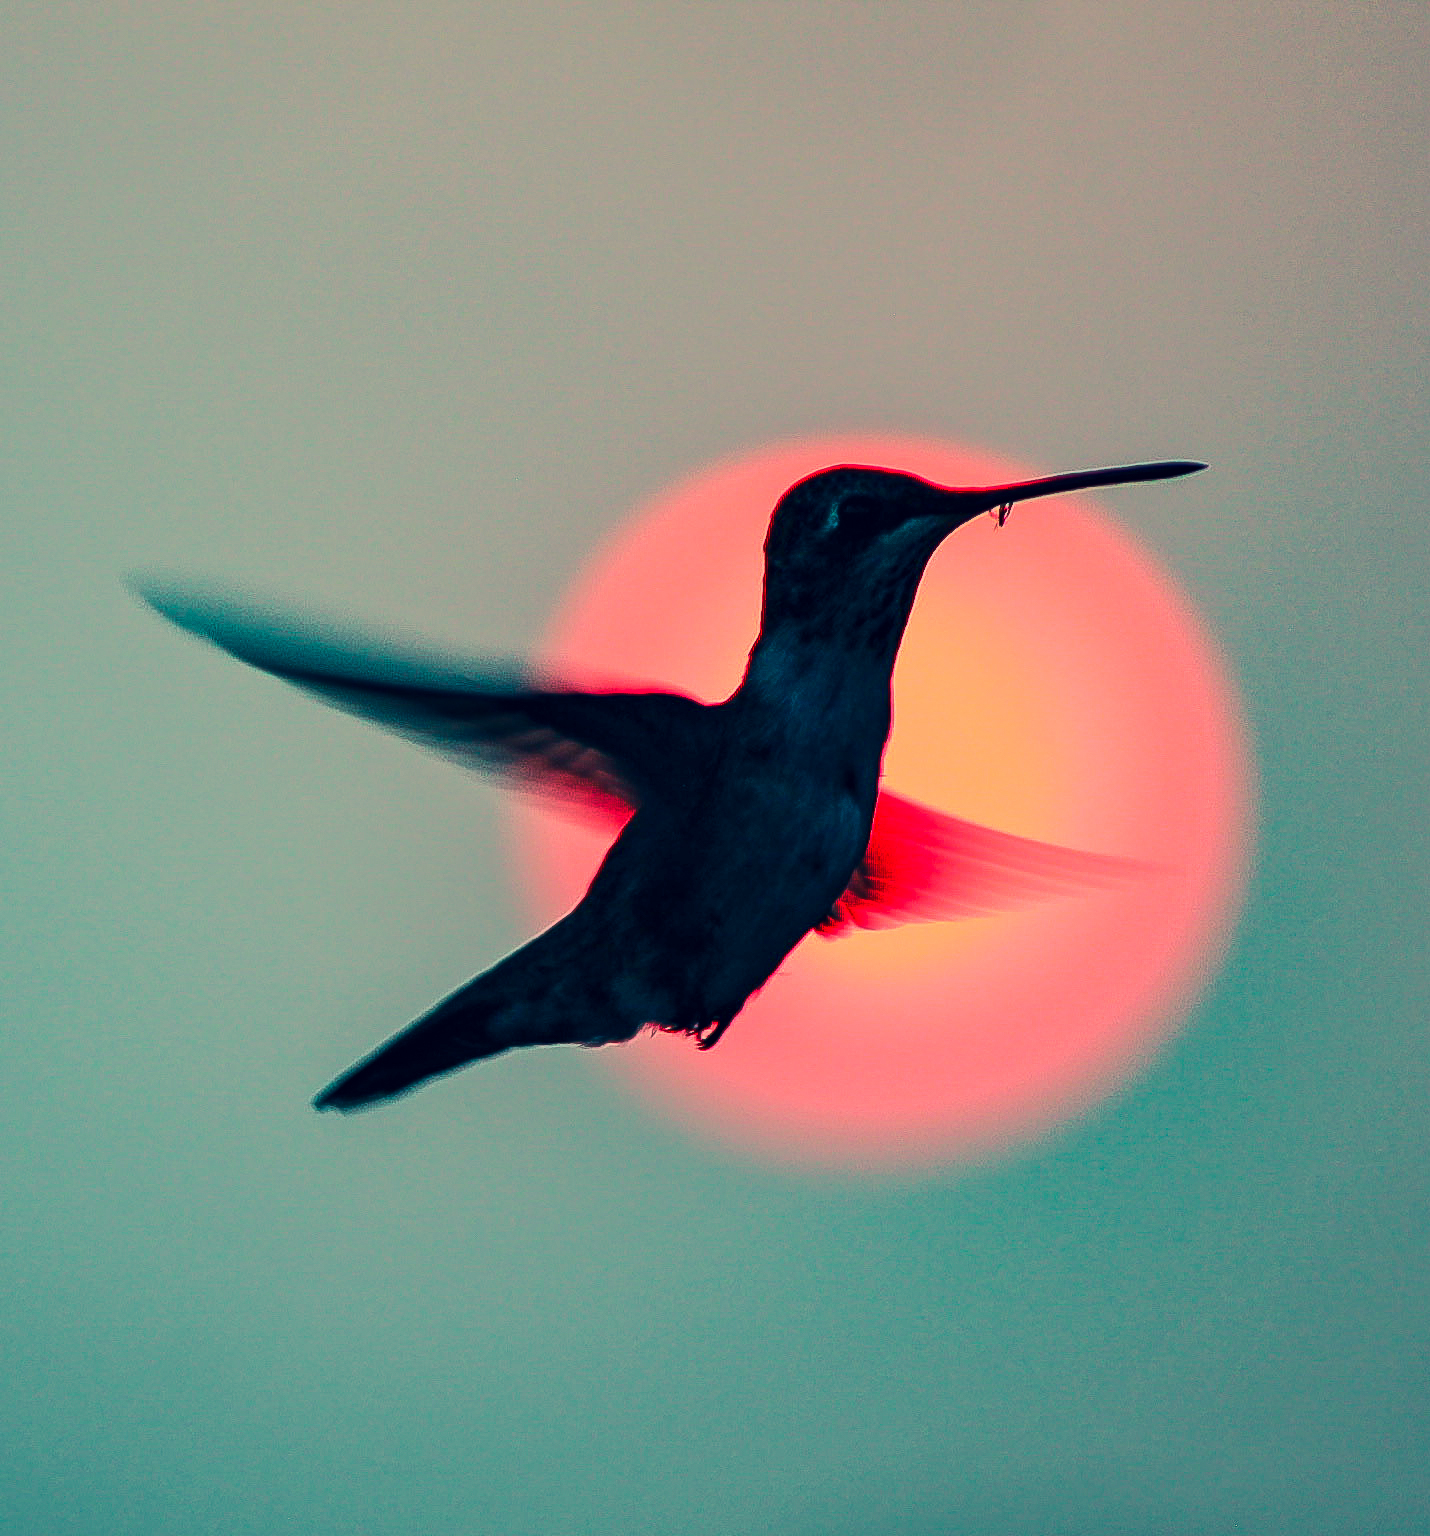 A hummingbird hovering in front of the Colorado sun, painted red by the 2021 wildfires.